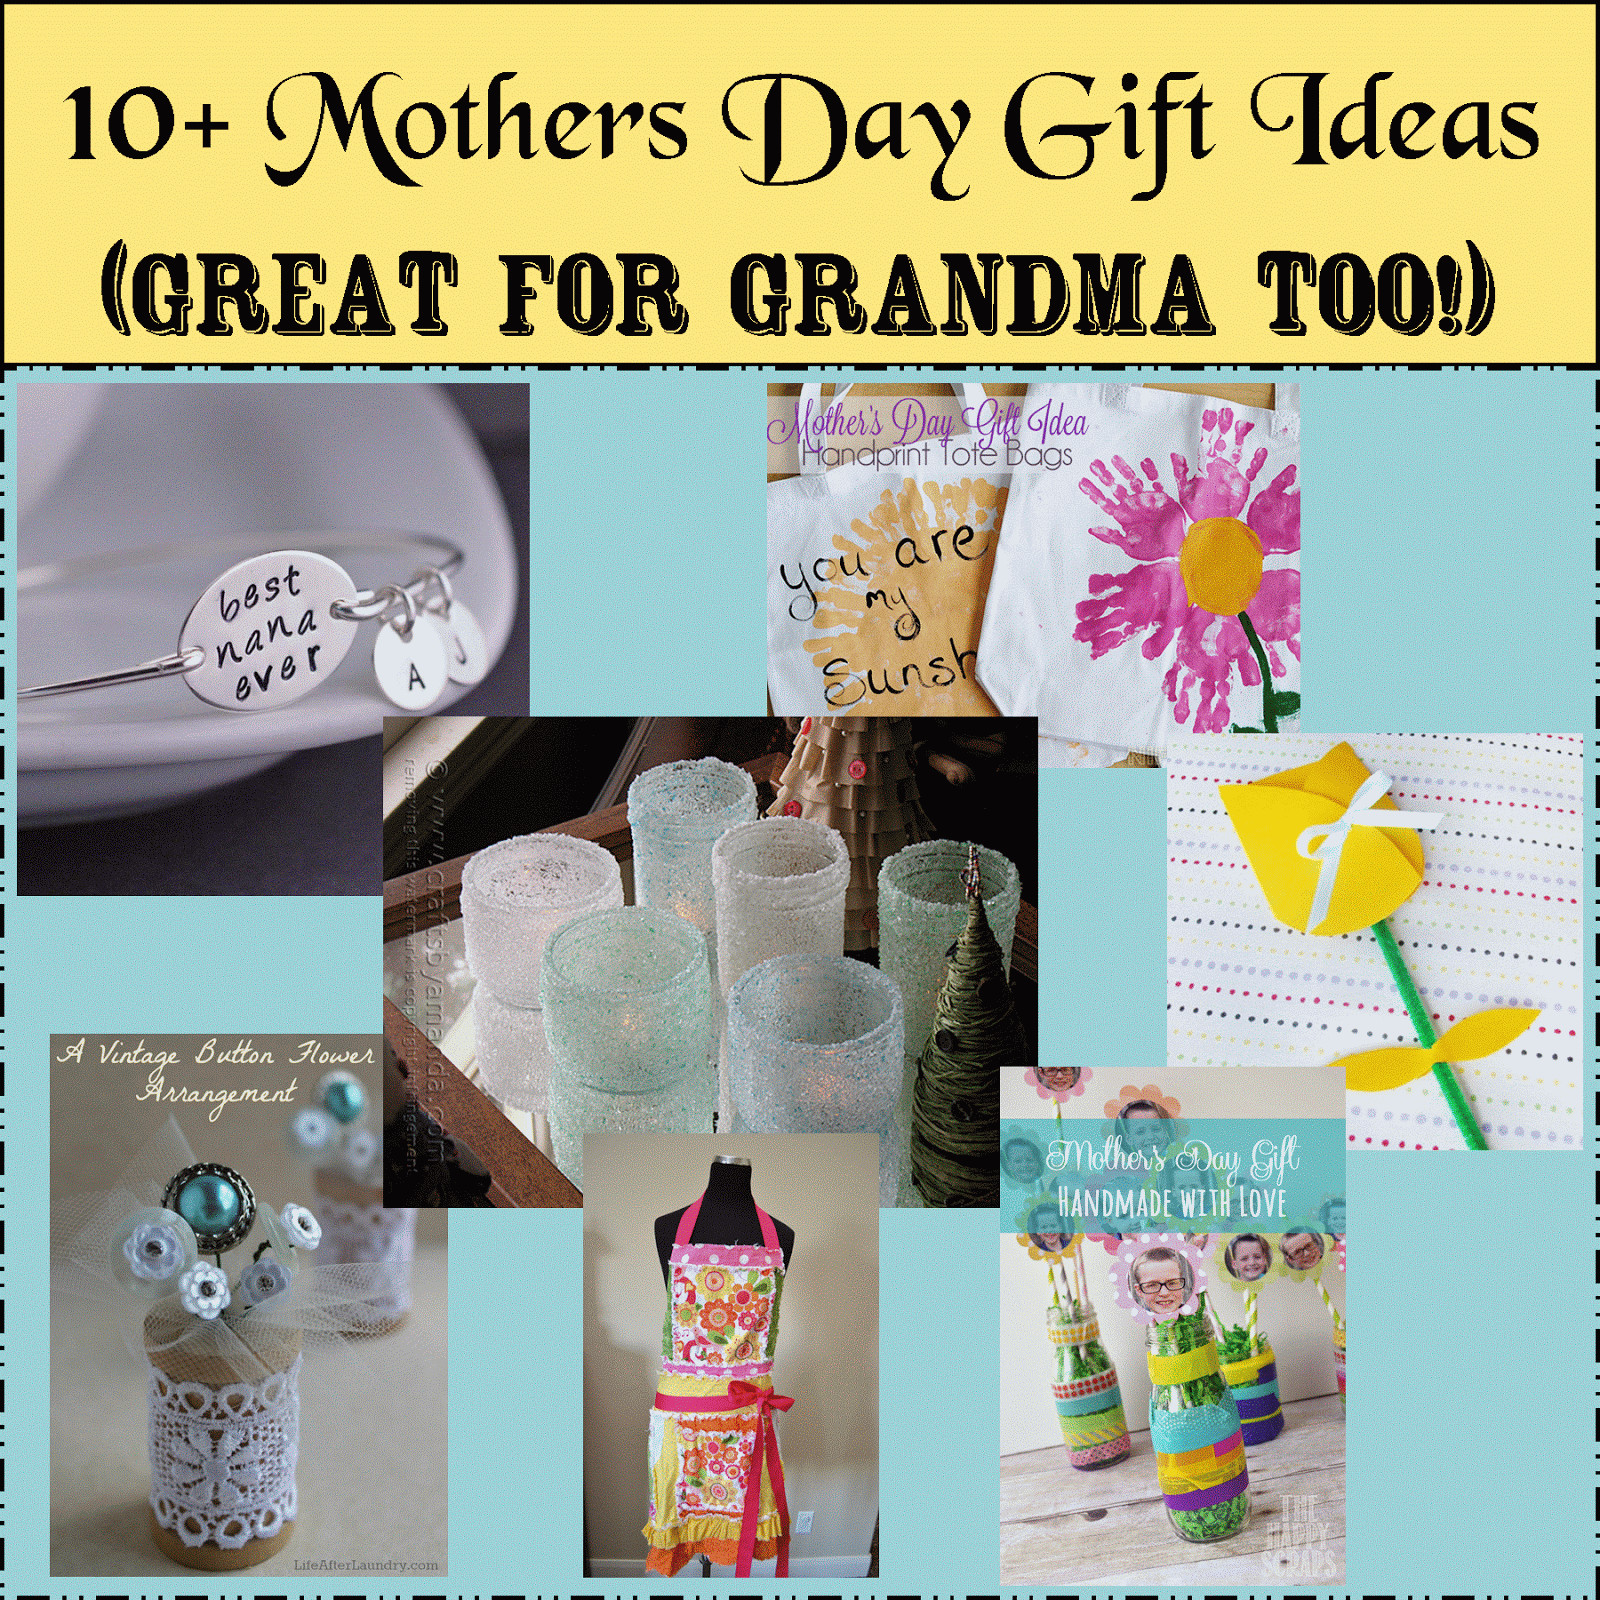 Great Father'S Day Gift Ideas
 Mother Day Gifts Roundup Perfect for Grandma Too